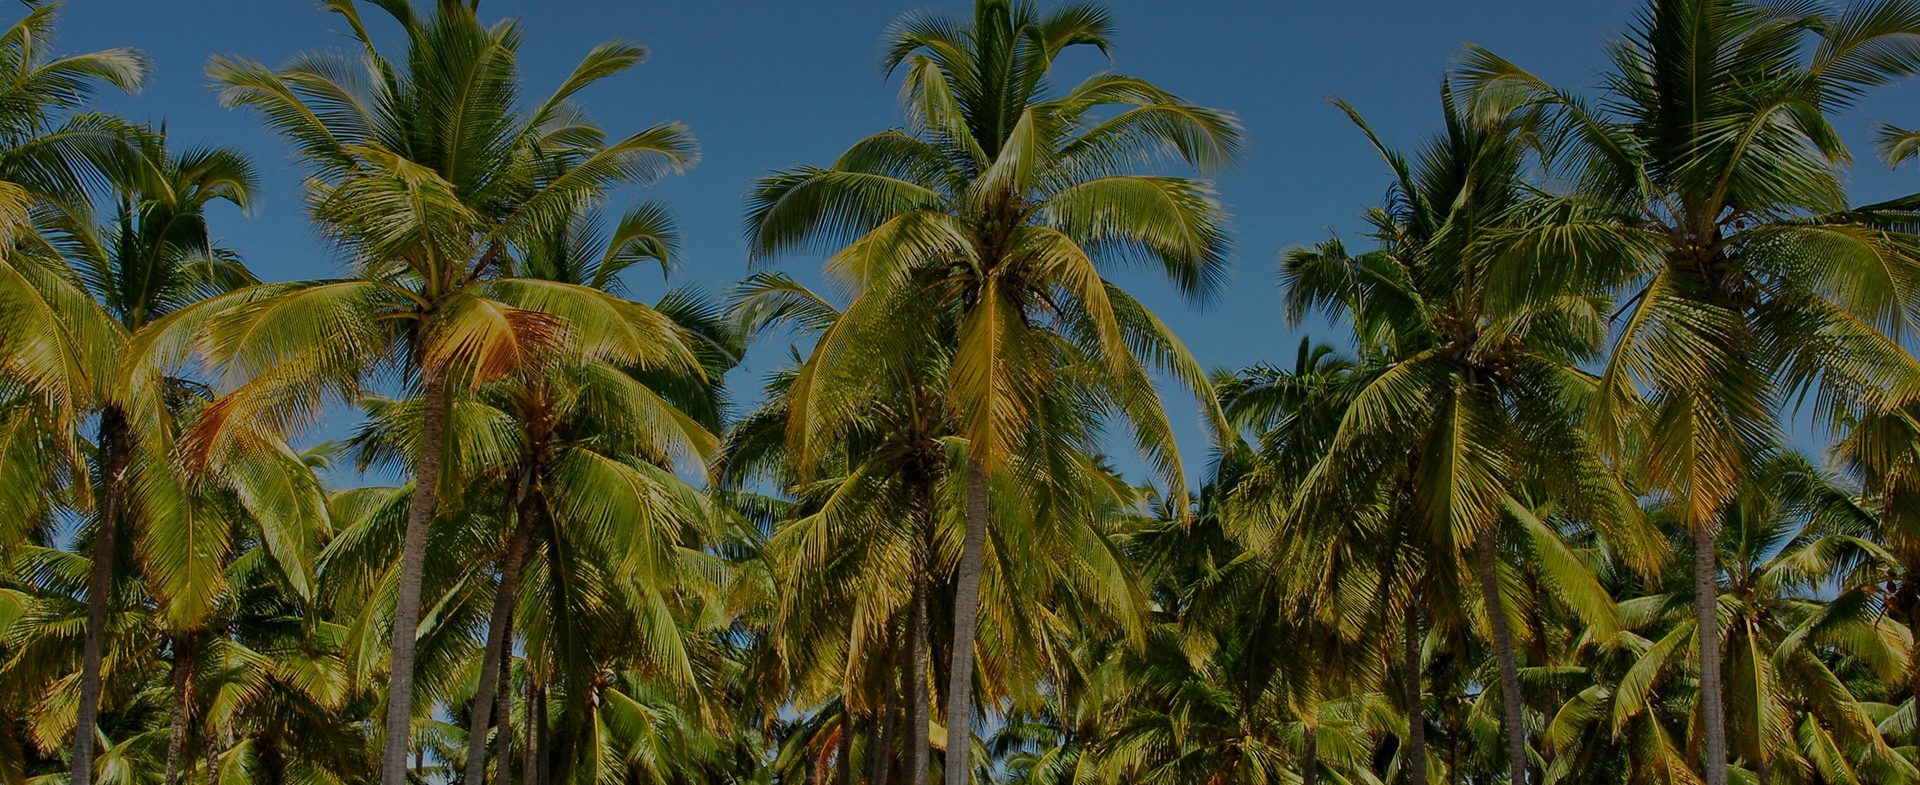 A panoramic view of tall palm trees with lush green fronds against a clear blue sky, evoking a tropical beach safari atmosphere.